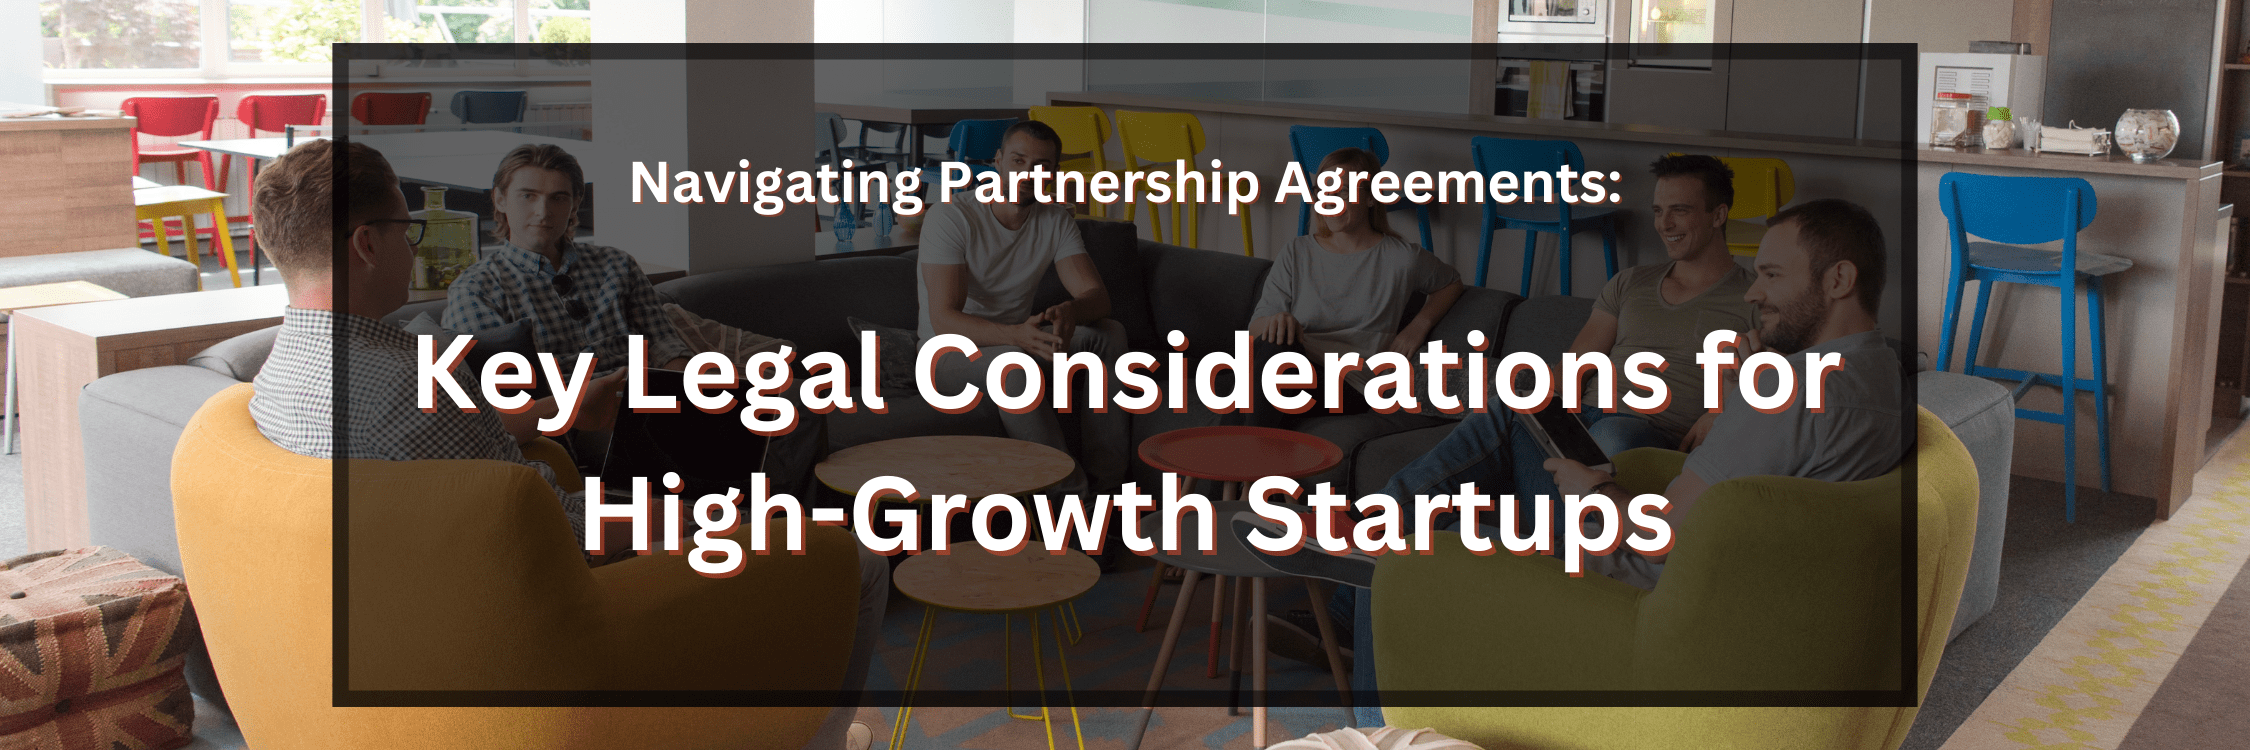 Navigating Partnership Agreements Key Legal Considerations For High Growth Startups